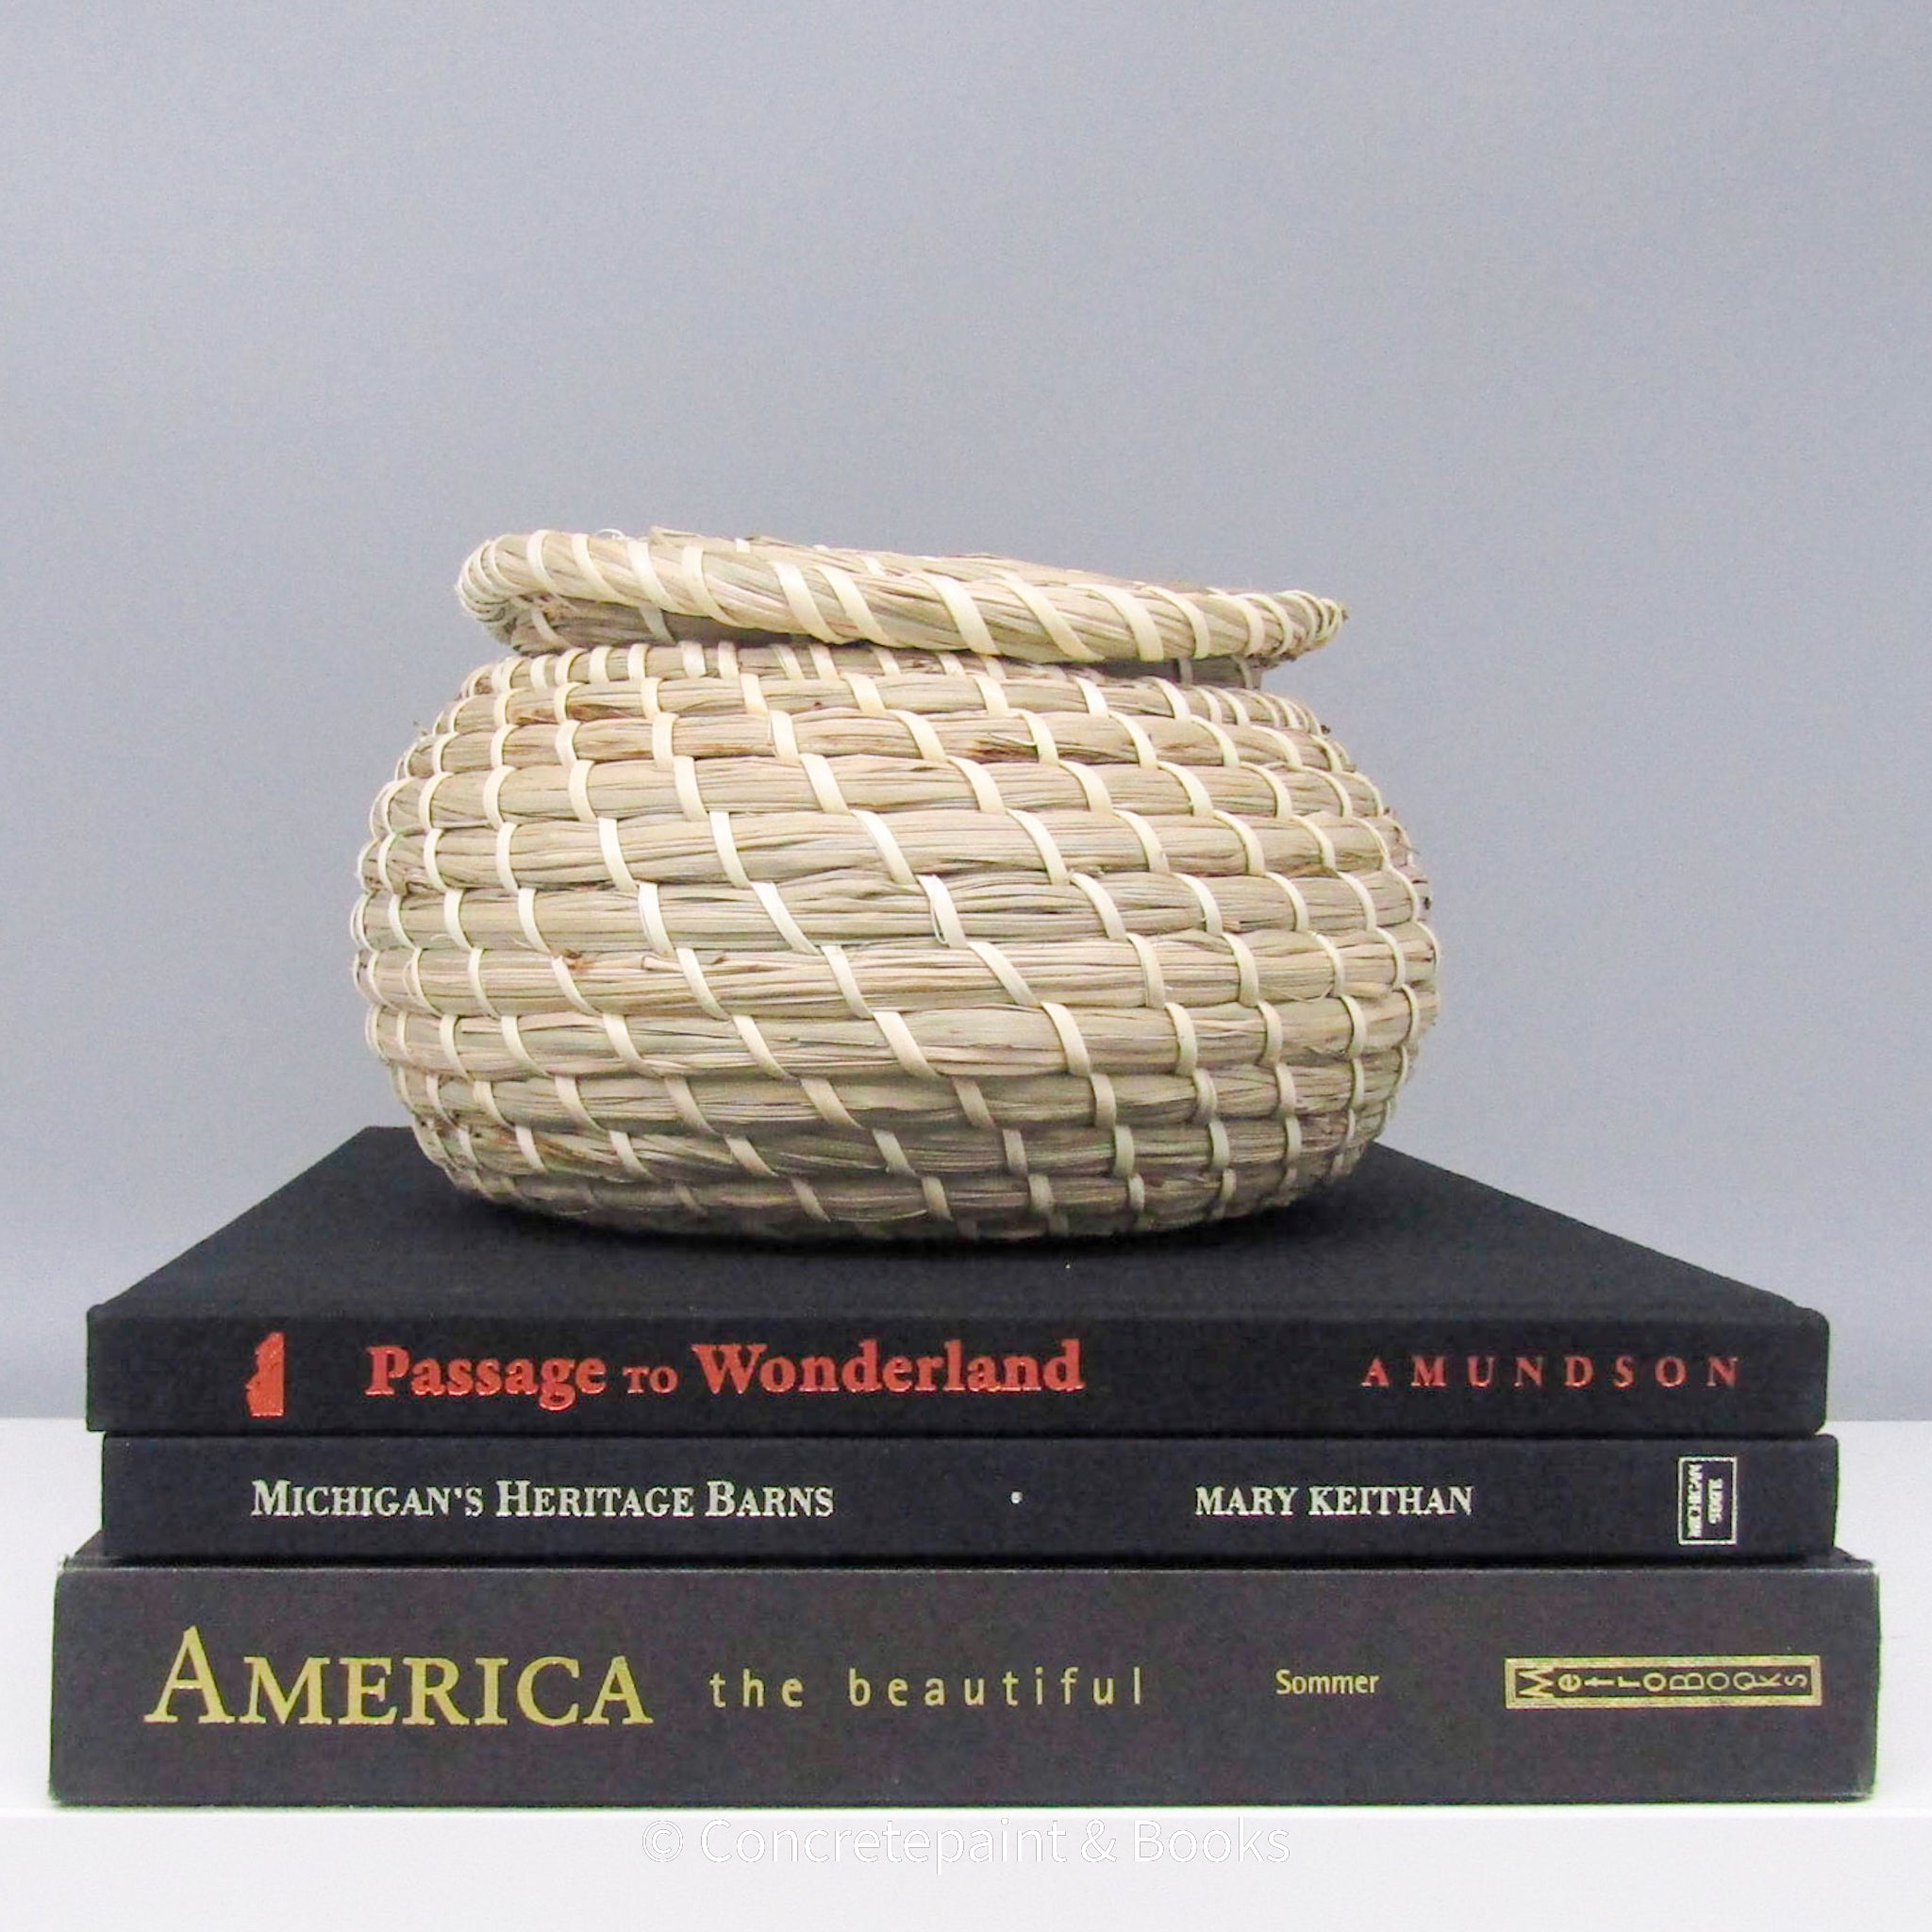 Real headcover books used as staged home décor. Stack of large black coffee table books with ikea seagrass basket on top. Mens bachelor pad decor for sale.